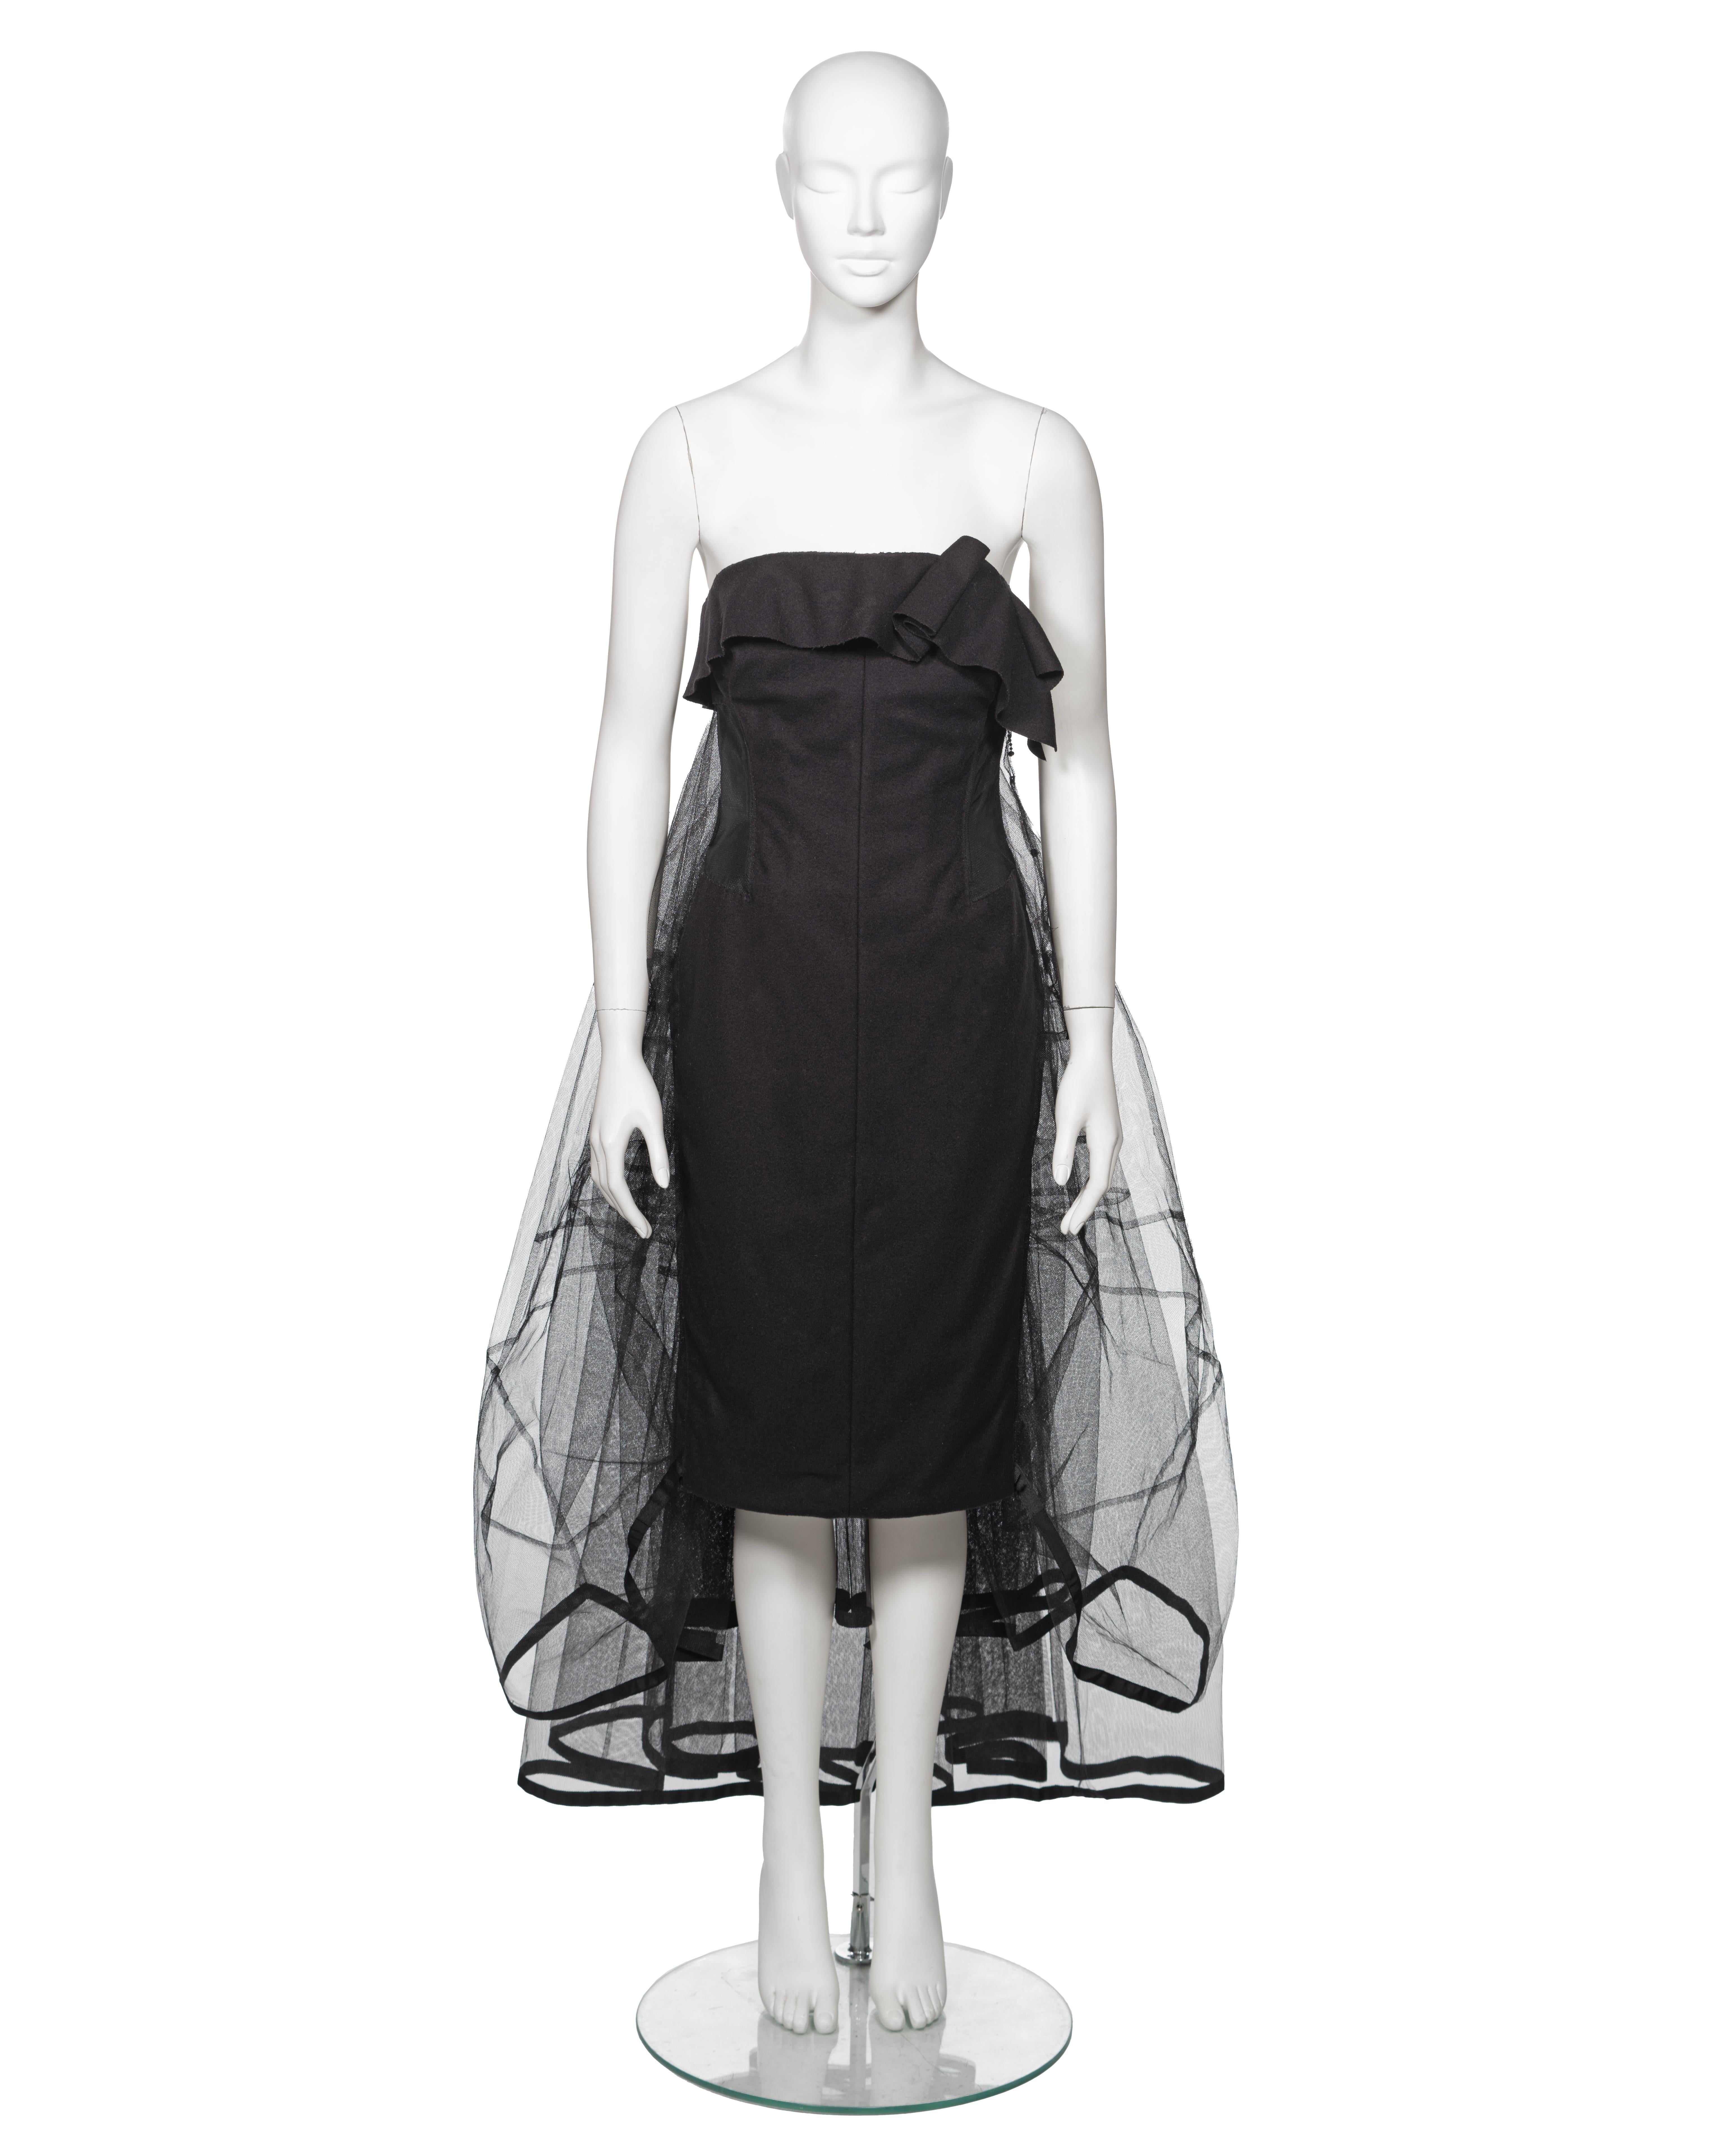 ▪ Louis Vuitton Black Wool Strapless Evening Dress
▪ Creative Director: Marc Jacobs
▪ Fall-Winter 2008
▪ Crafted from black felted wool, this garment exudes elegance and sophistication
▪ Boasting a built-in corset, the strapless design offers a